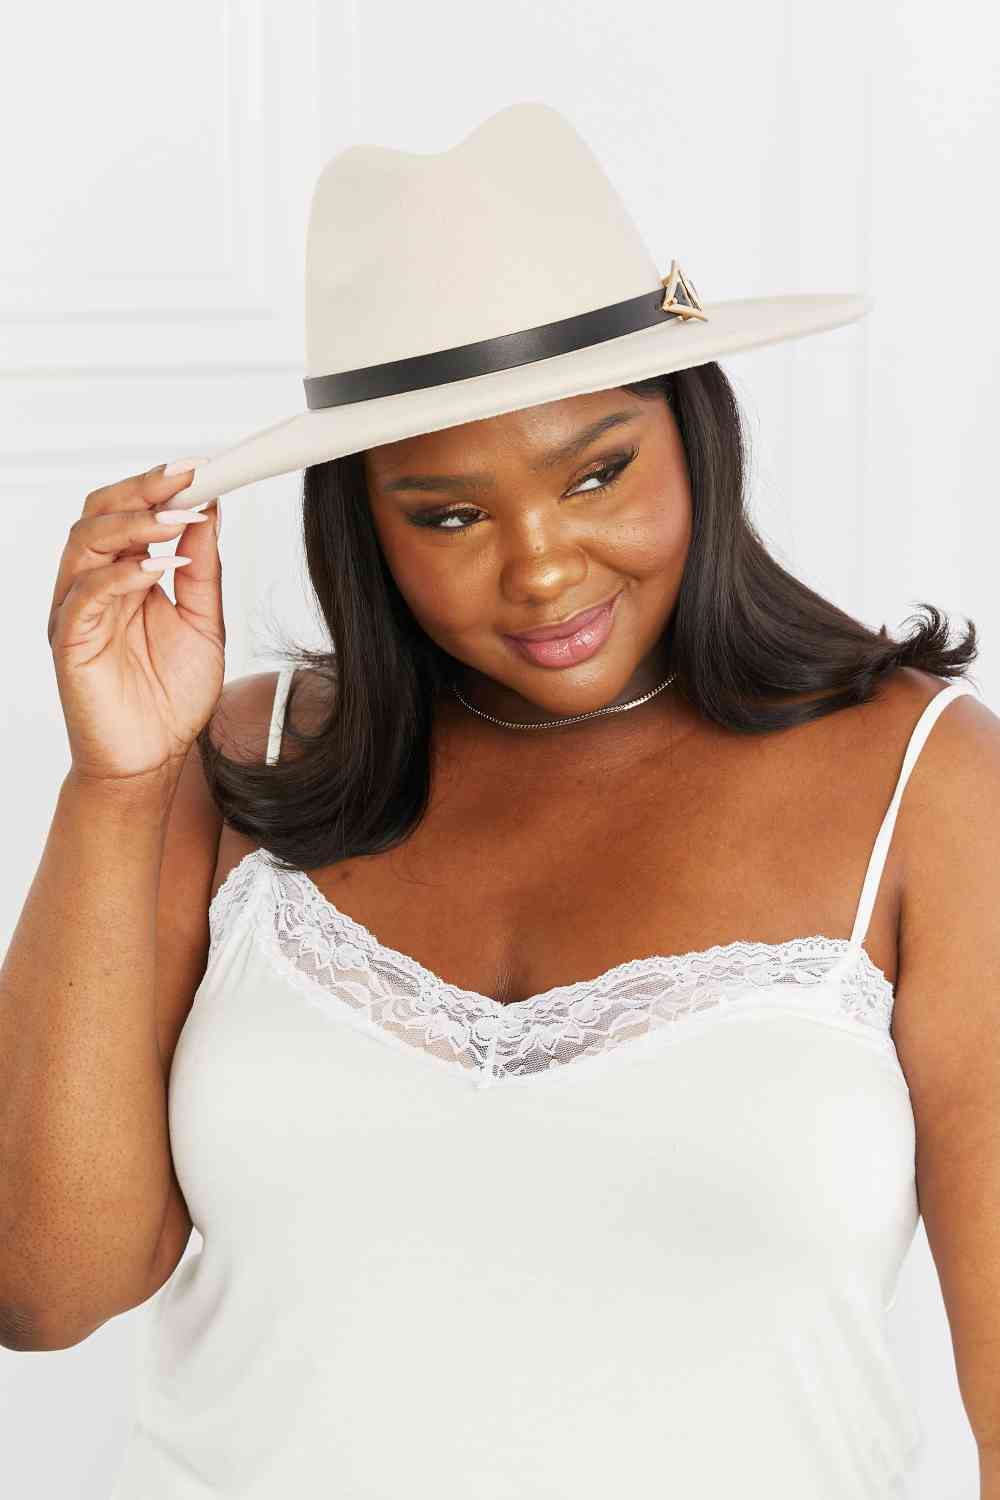 a woman wearing a white top and a hat